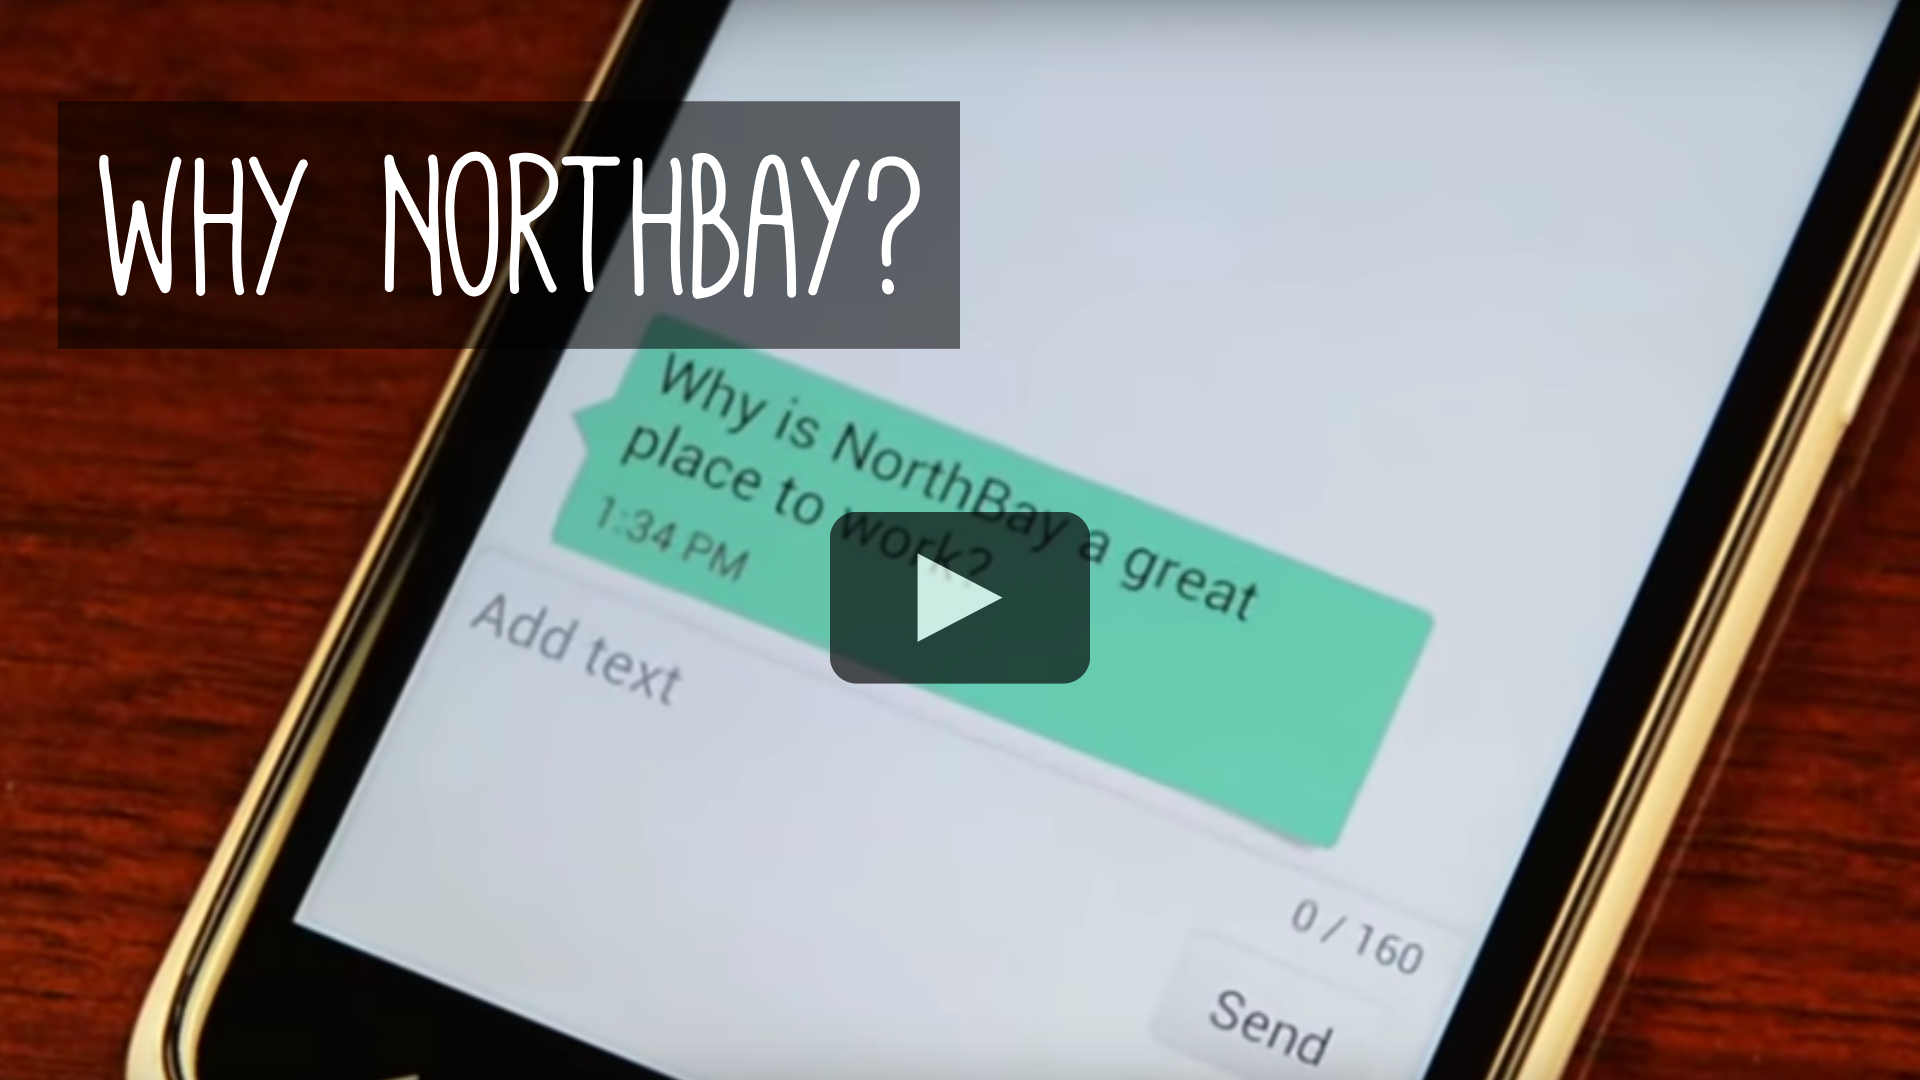 This video goes over the many things that make NorthBay Healthcare a great place to work.